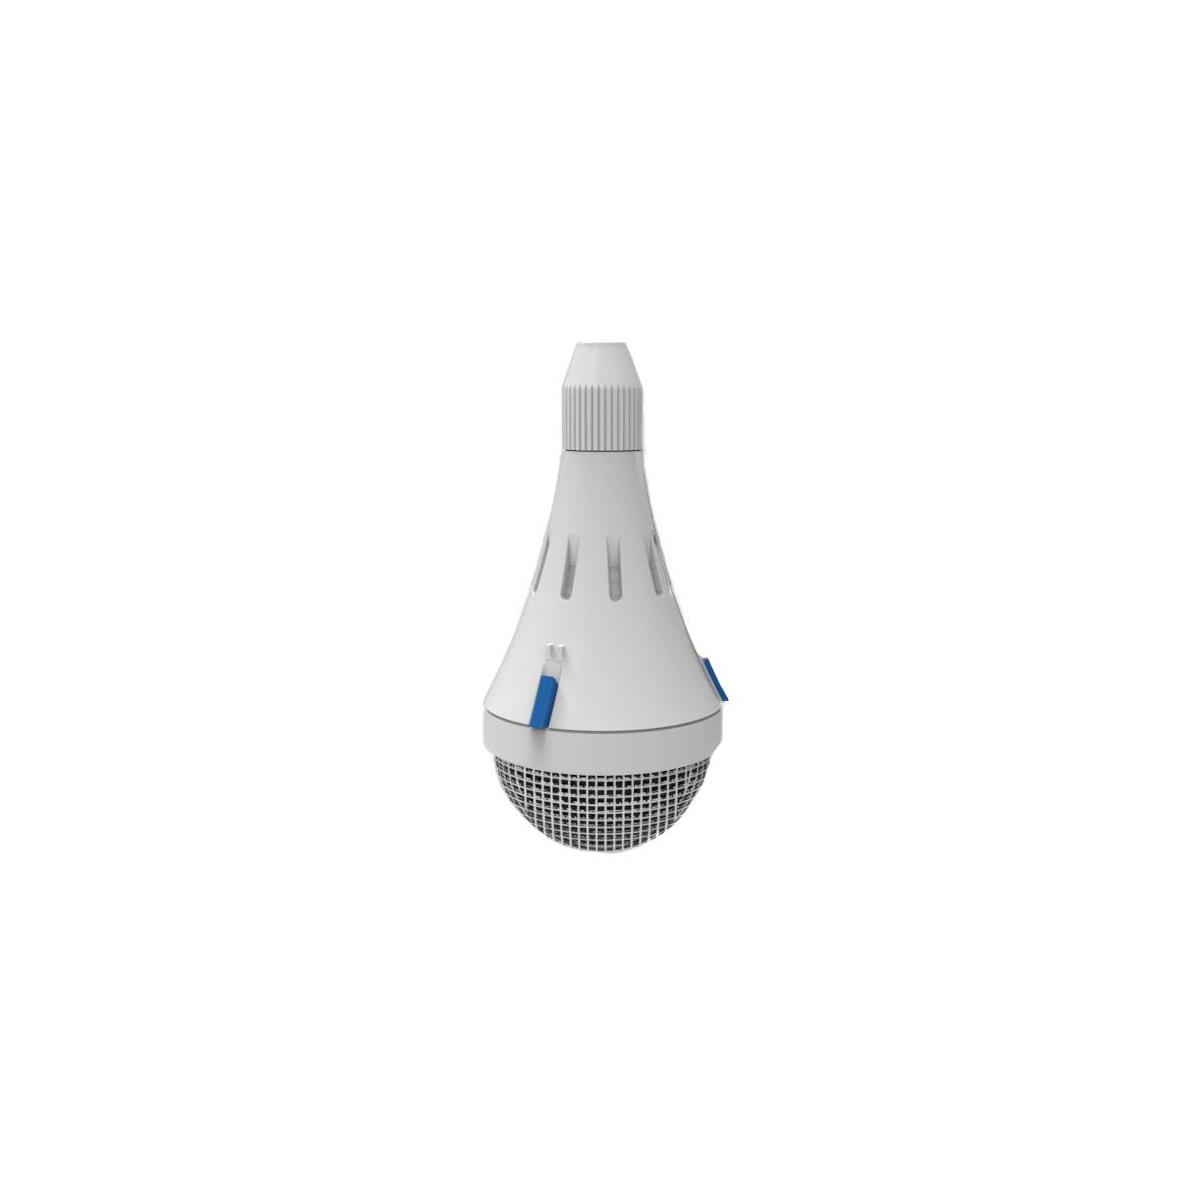 ClearOne Ceiling Mic Array Analog-X 3-Channel 1-Array, 1x White Mic Capsule -  930-6200-103-W-A